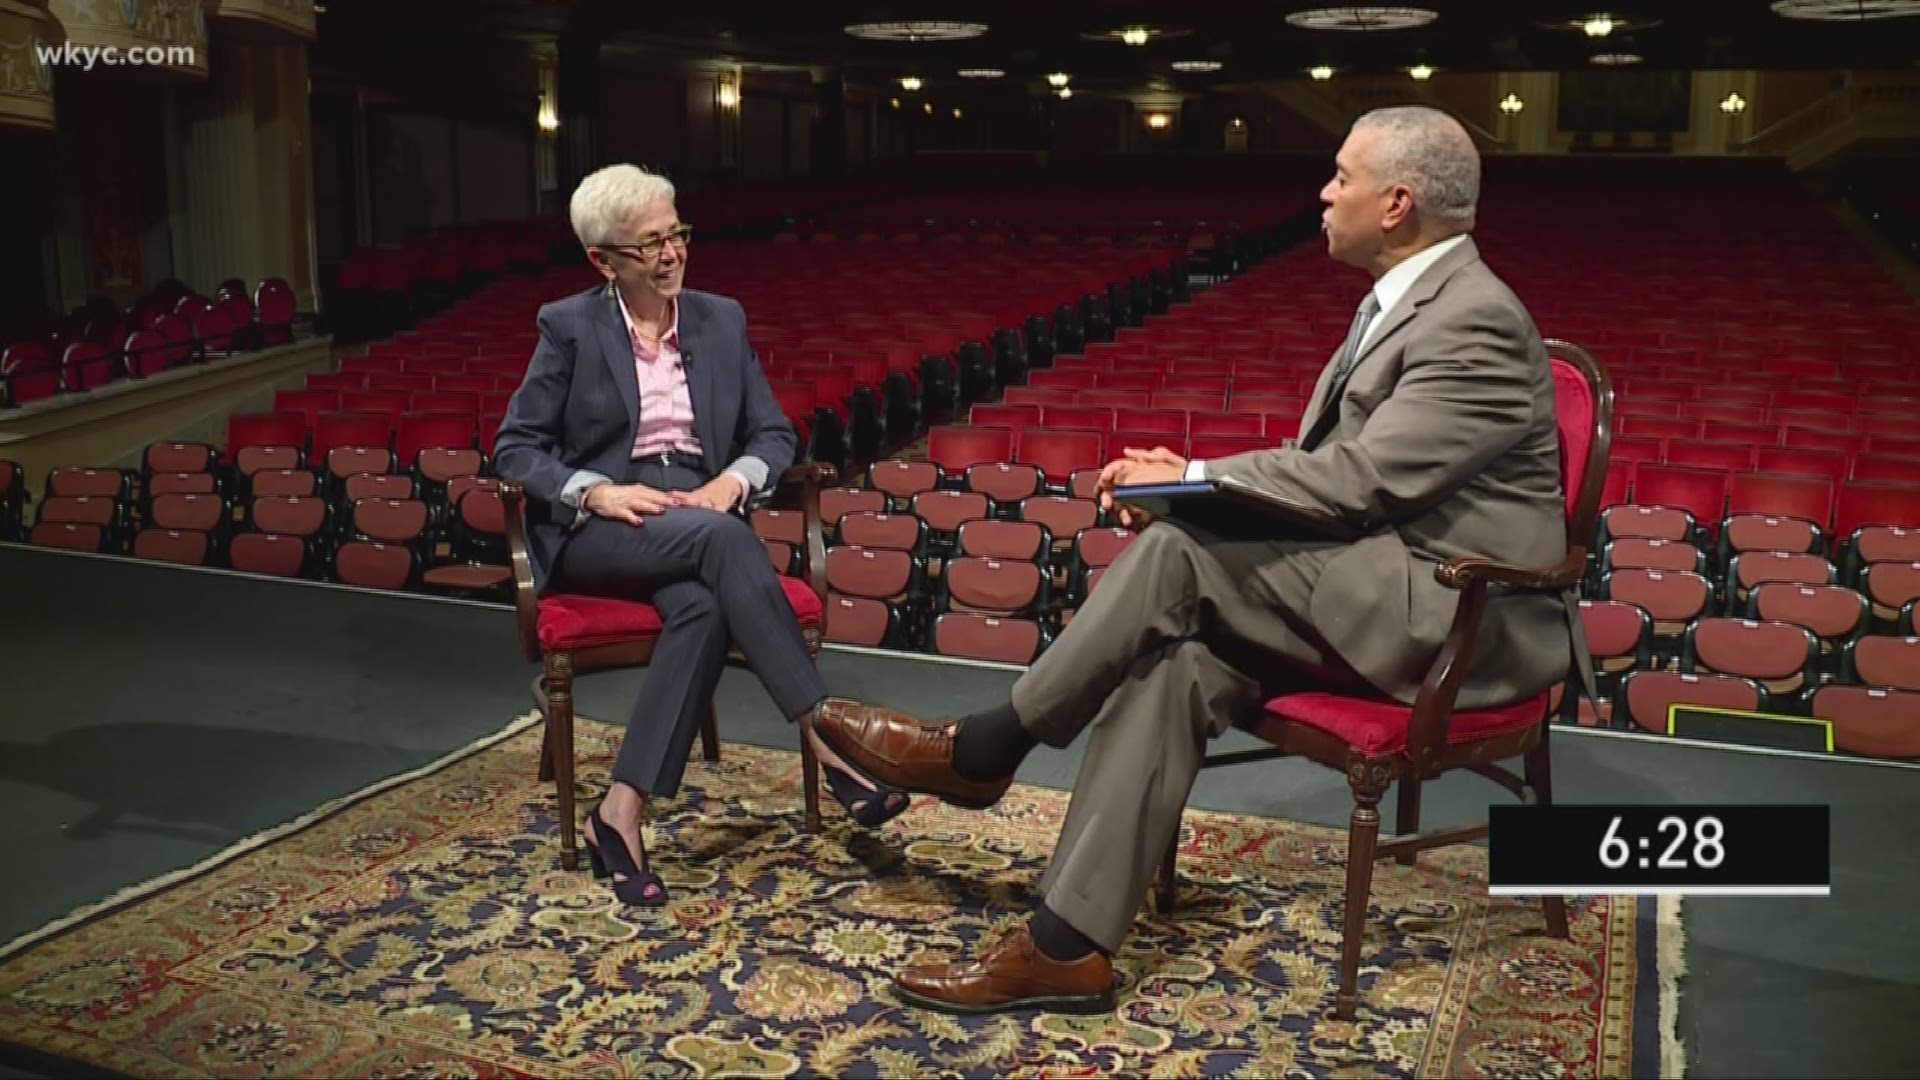 July 2019: Join us as Russ Mitchell sits down for an in-depth conversation with Gina Vernaci, the new President and CEO of Cleveland's iconic Playhouse Square.